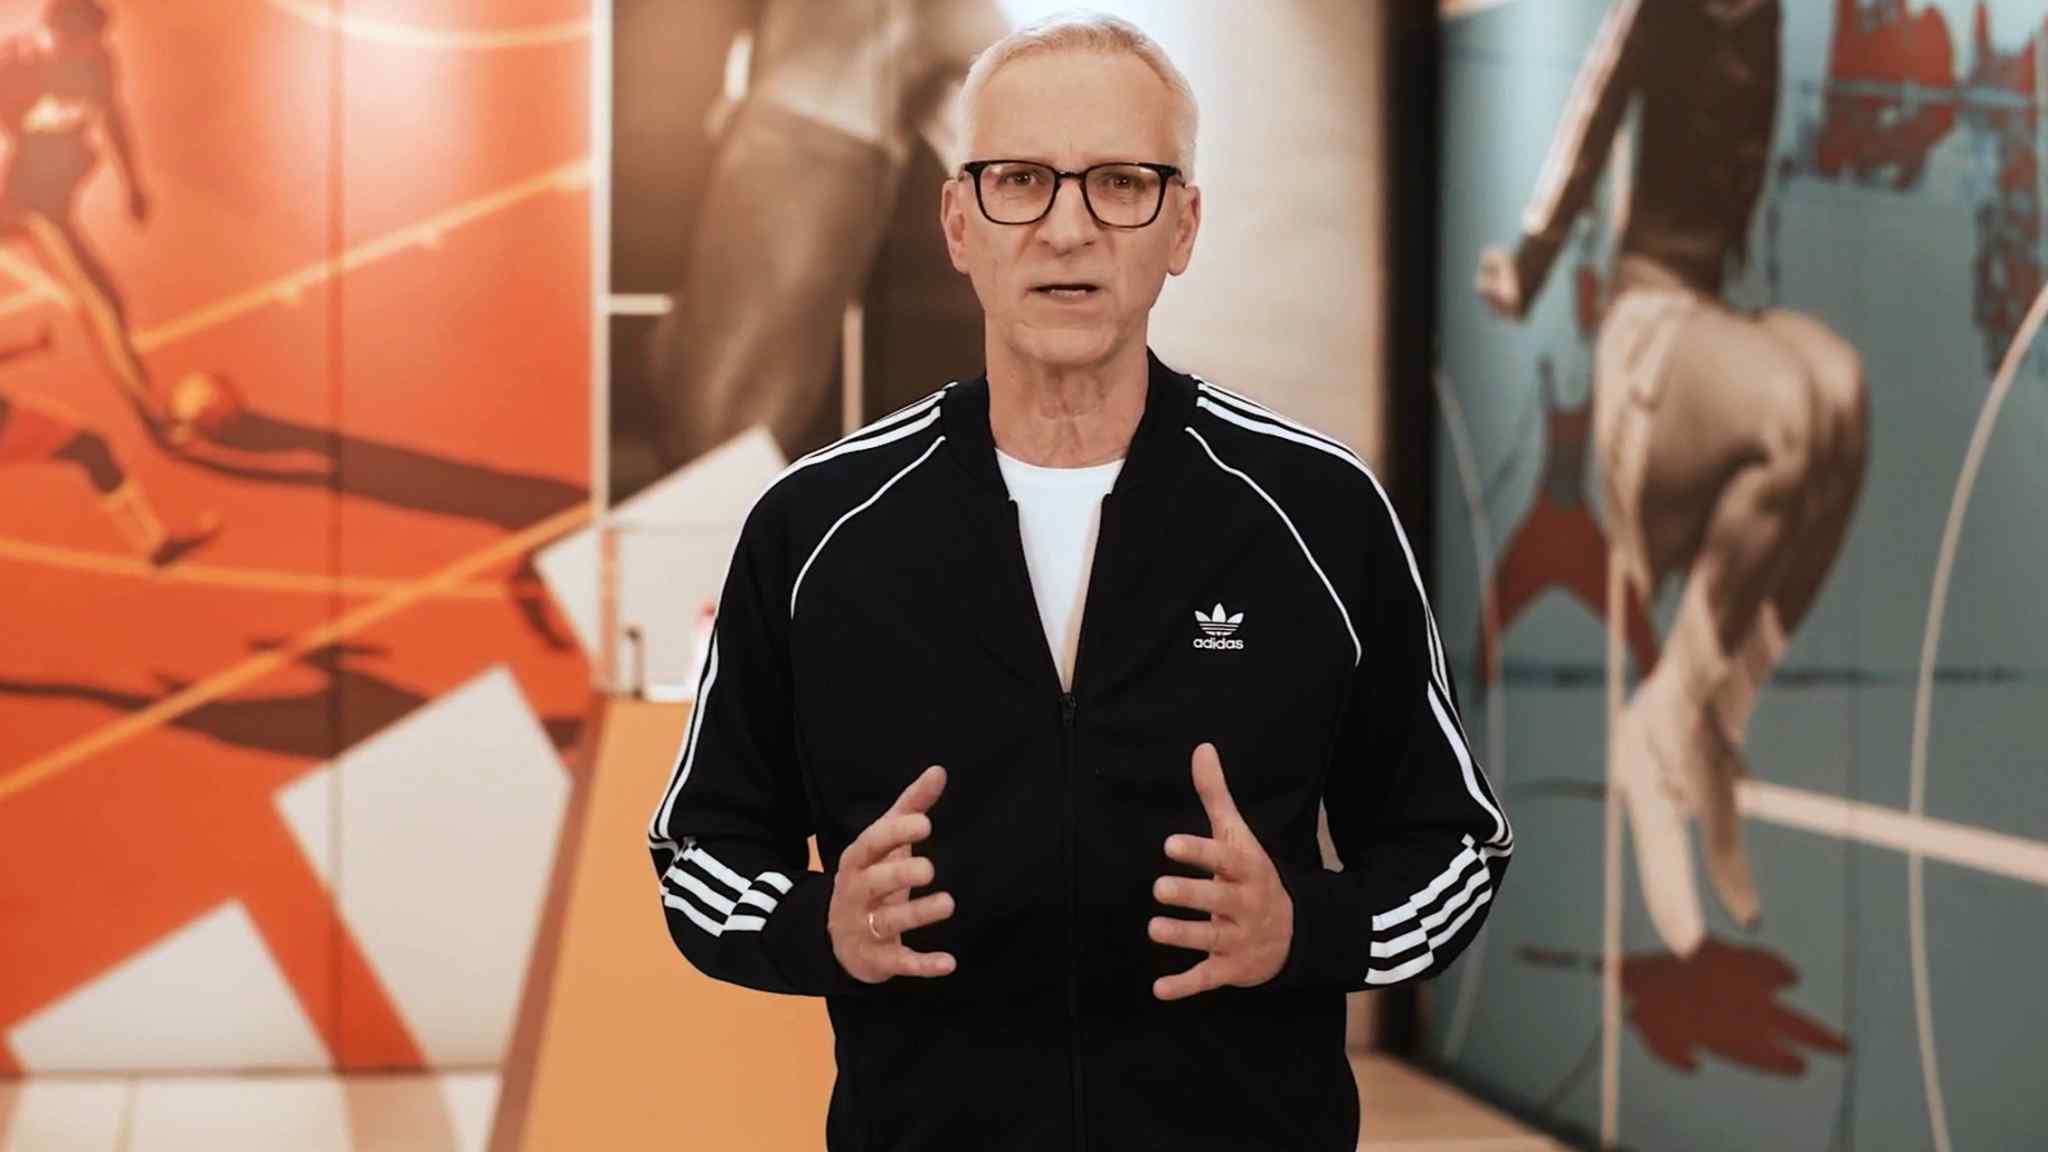 Top Adidas executive rebuked in ‘final warning’ over comments on diversity